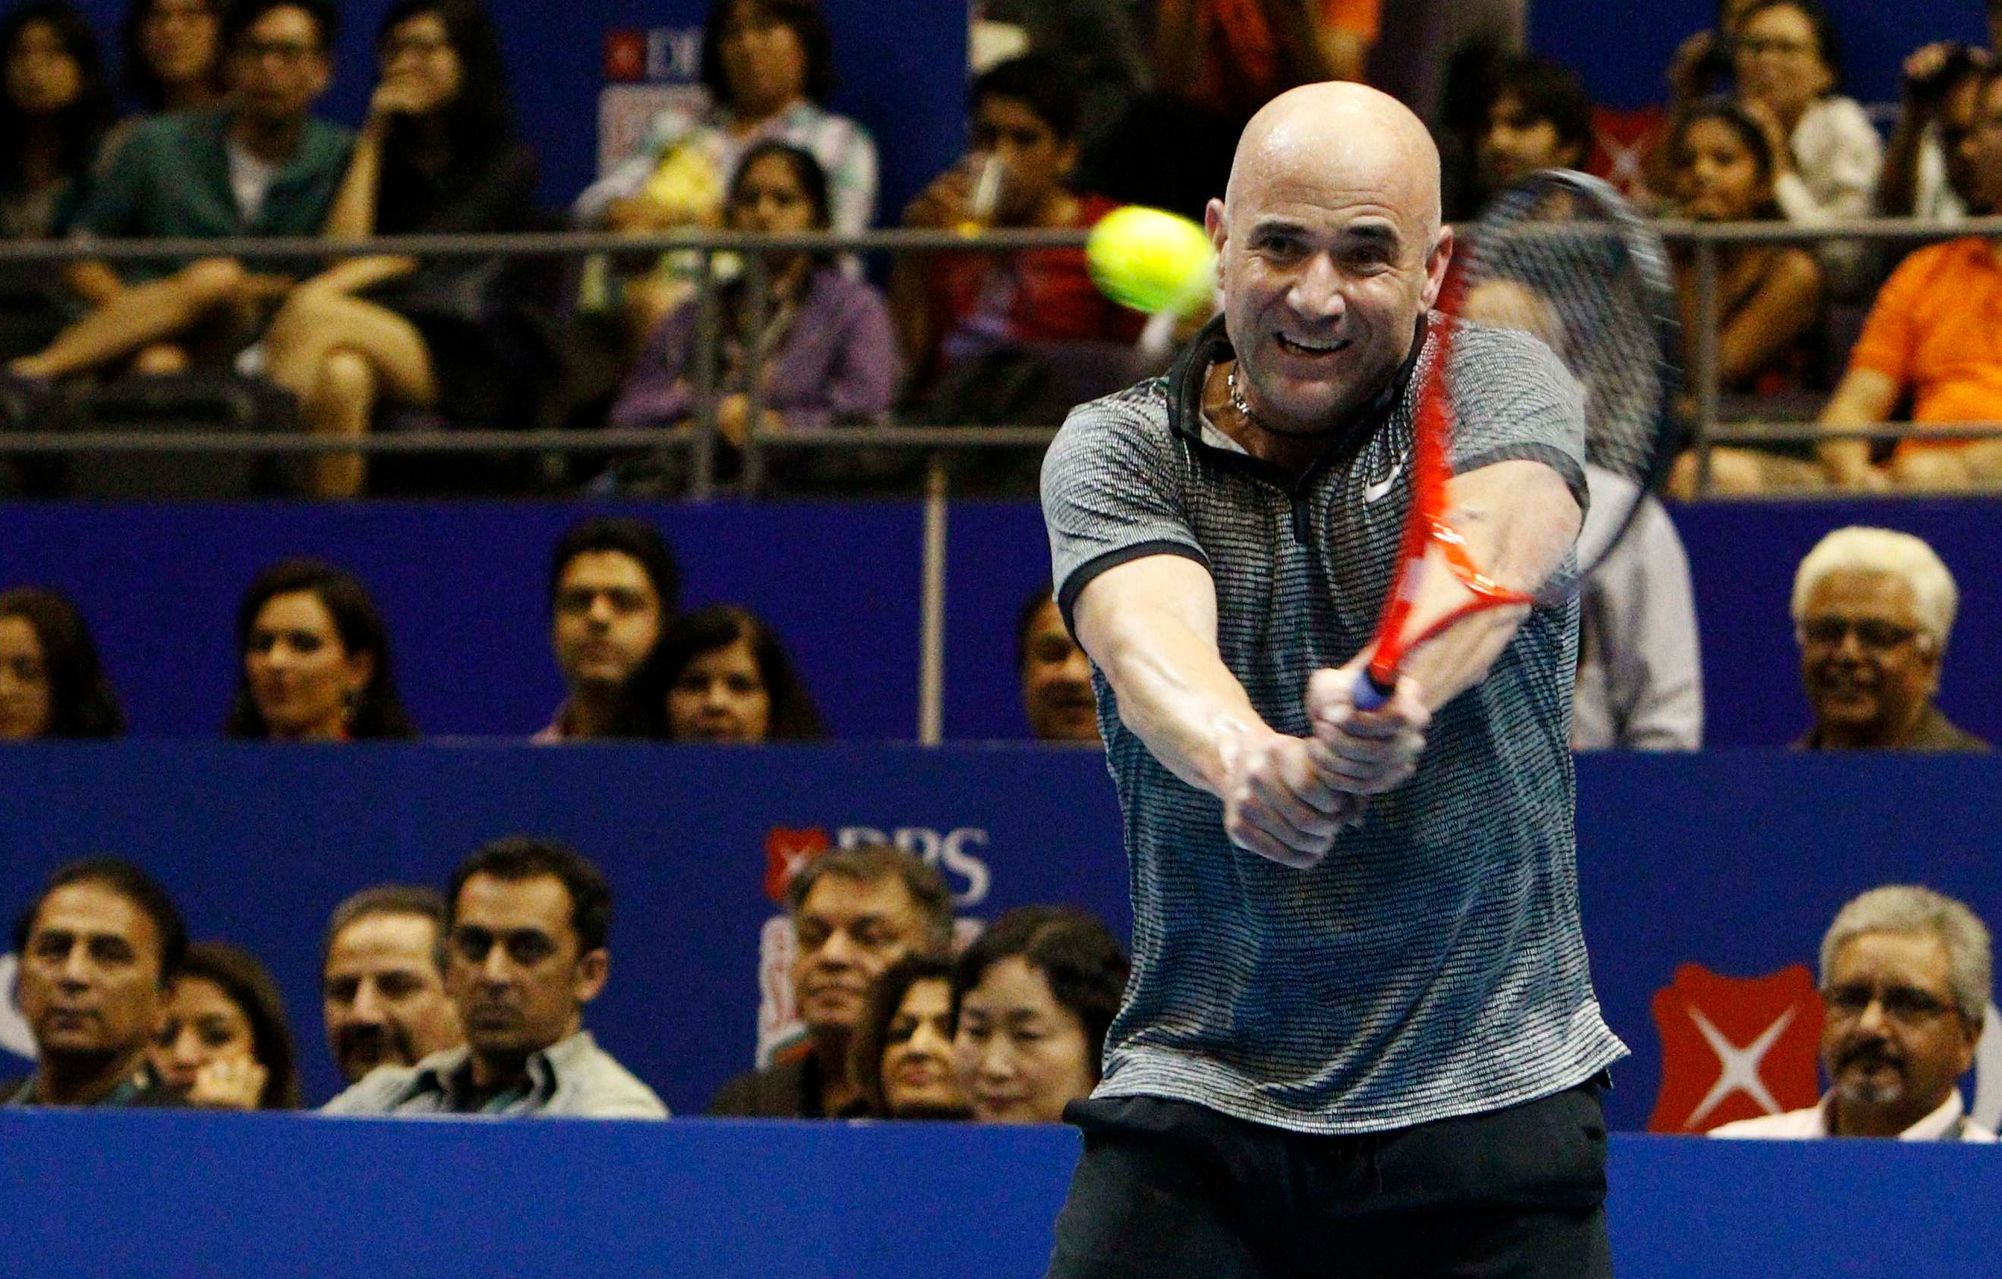 Singapore Slammers' Andre Agassi of the U.S. hits a return to Manila Mavericks' Mark Philippoussis of Australia during their men's singles match at the International Premier Tennis League (IPTL) in Si